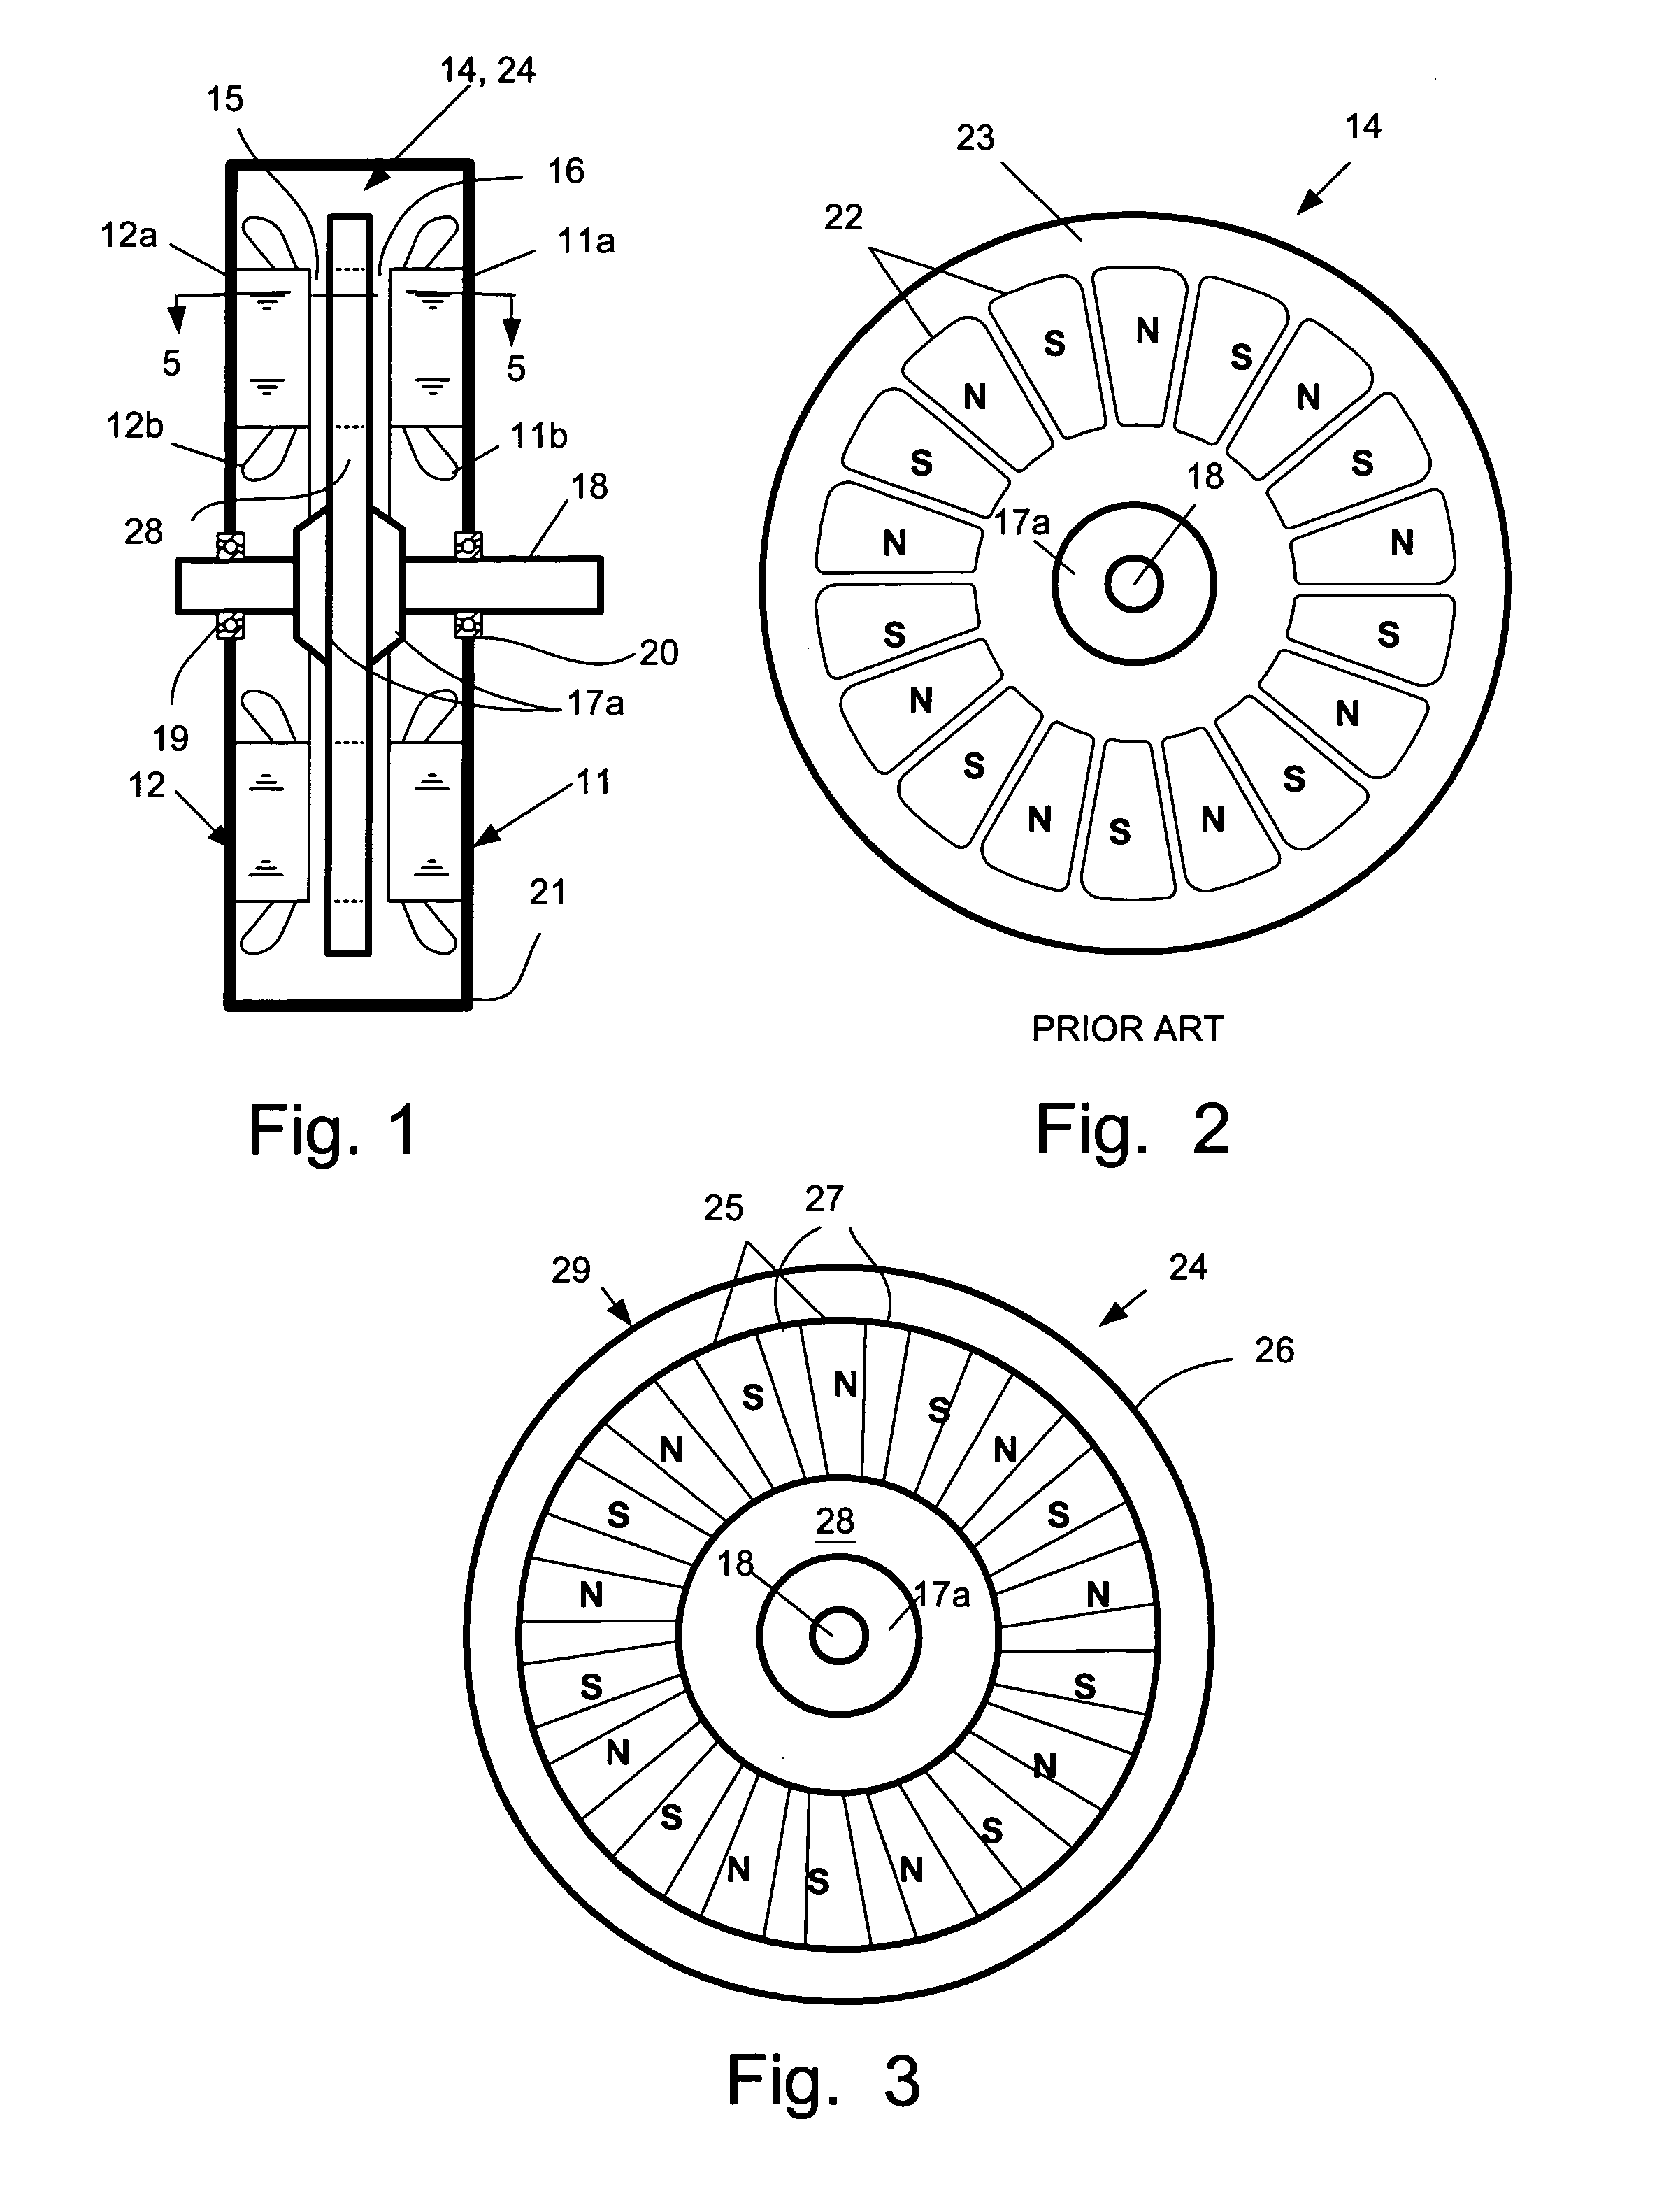 Axial gap permanent-magnet machine with reluctance poles and PM element covers